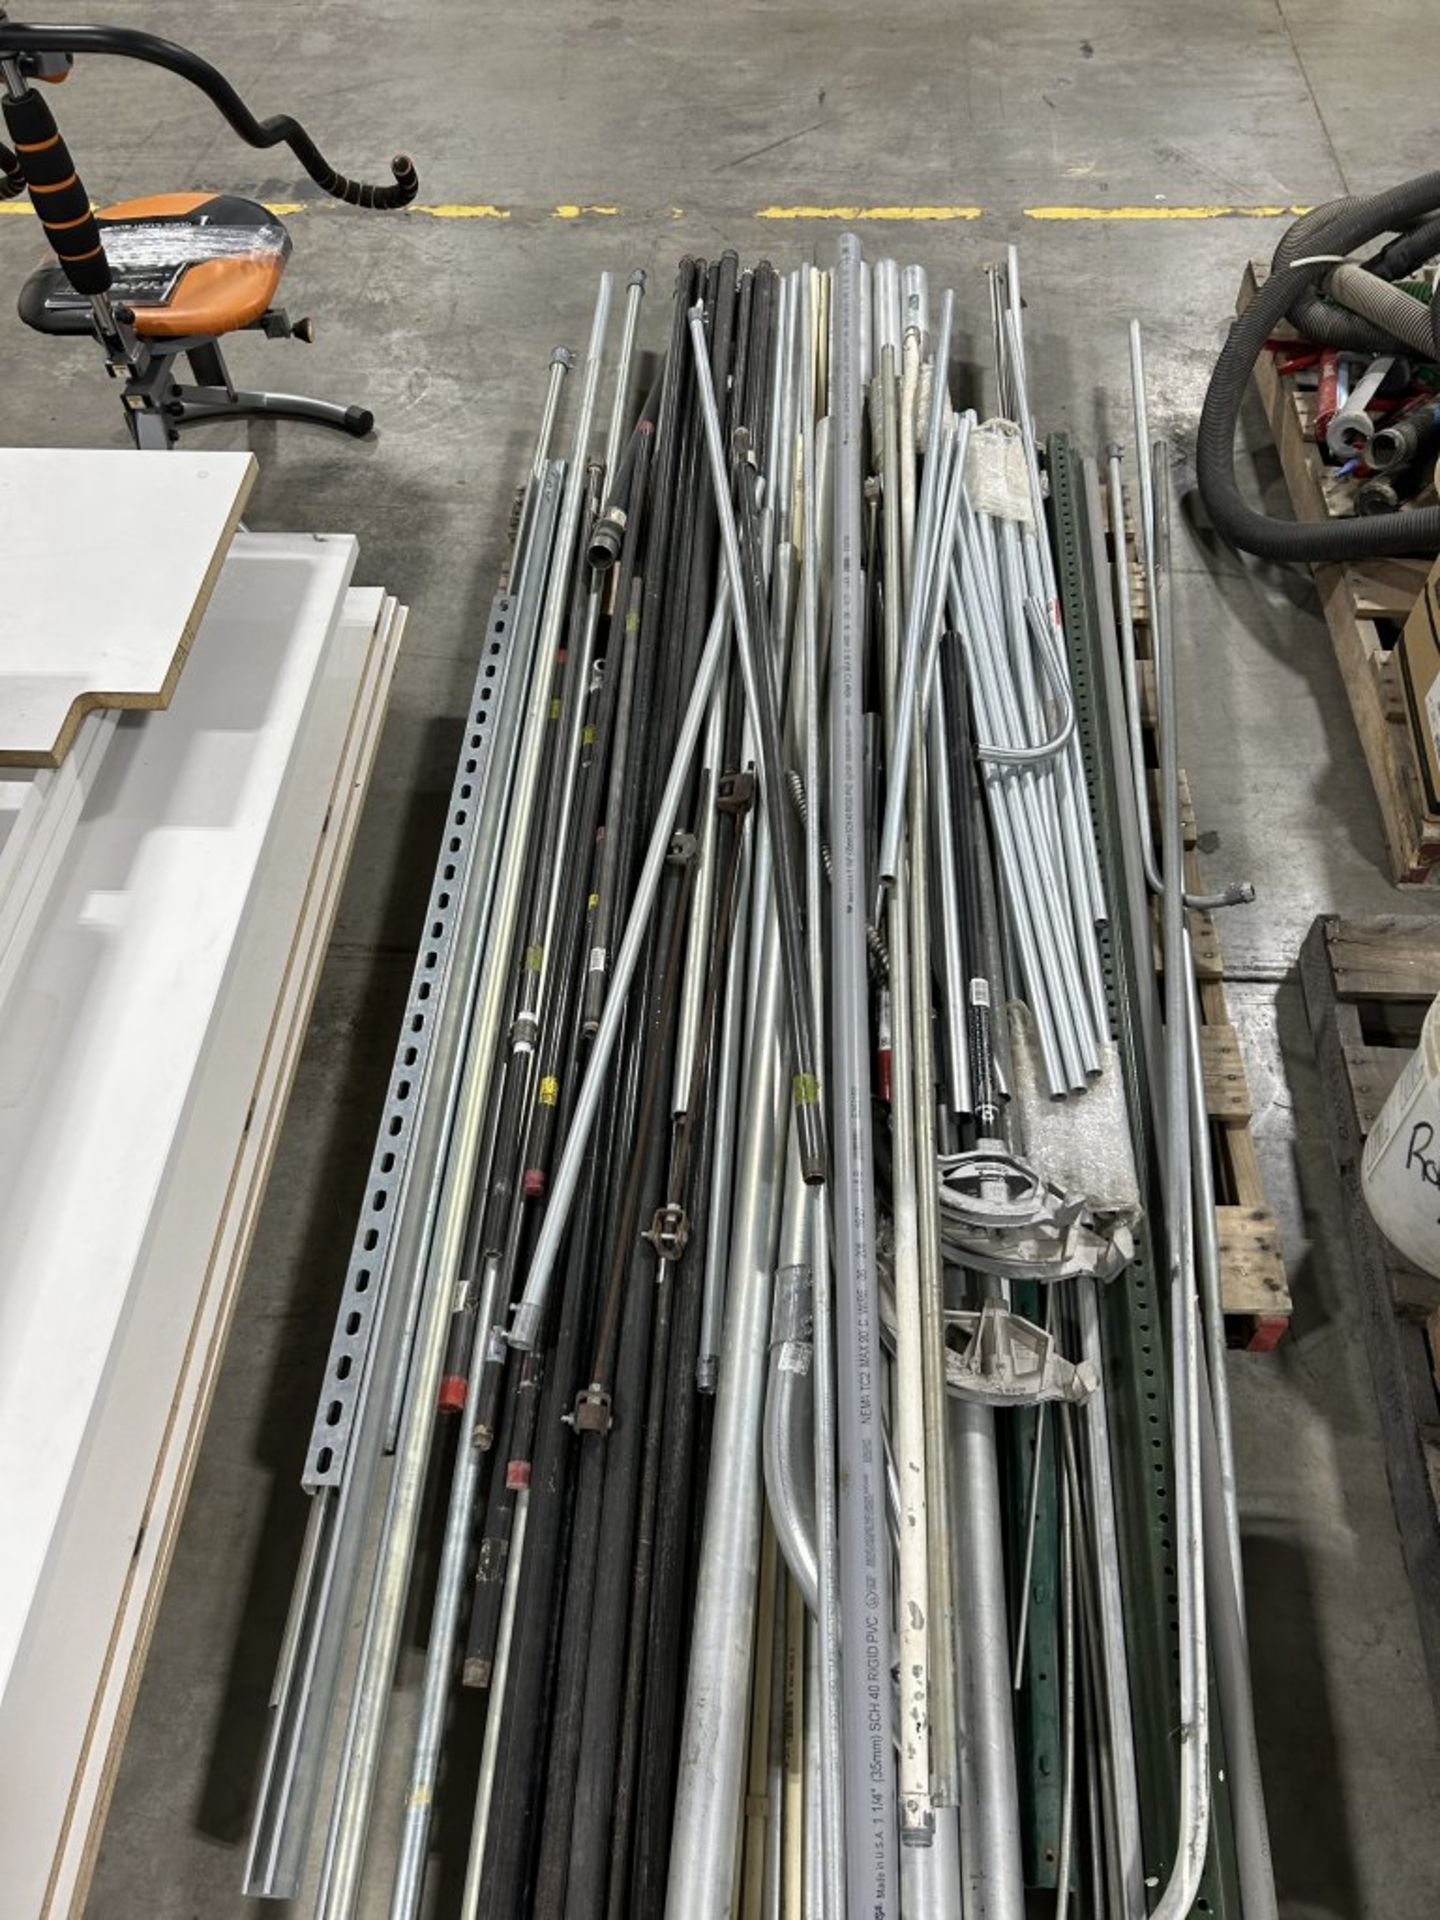 LARGE PILE OF ASSORTED CONDUIT BENDERS, CONDUIT, METAL PIPES, T-POSTS, ETC. - Image 2 of 5